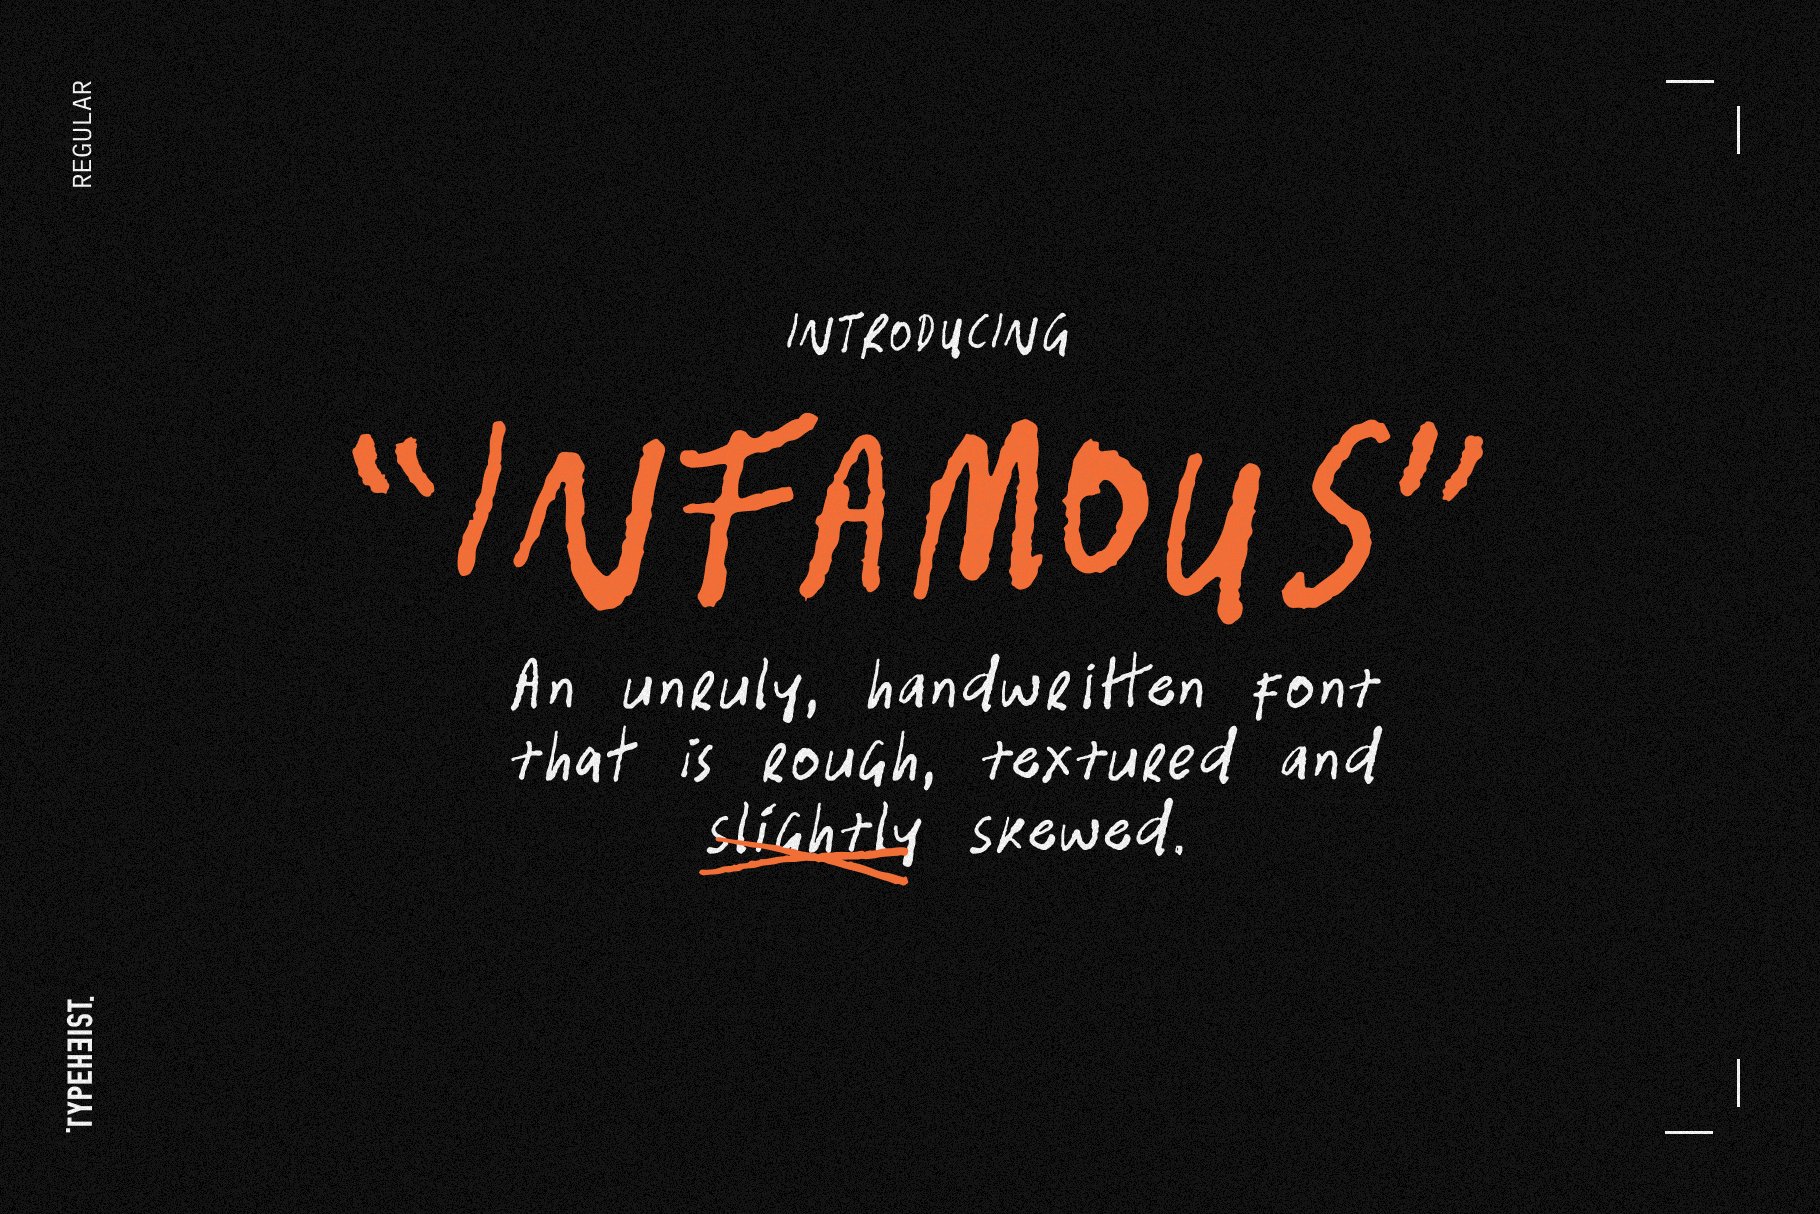 Infamous Unruly Handwritten Font cover image.